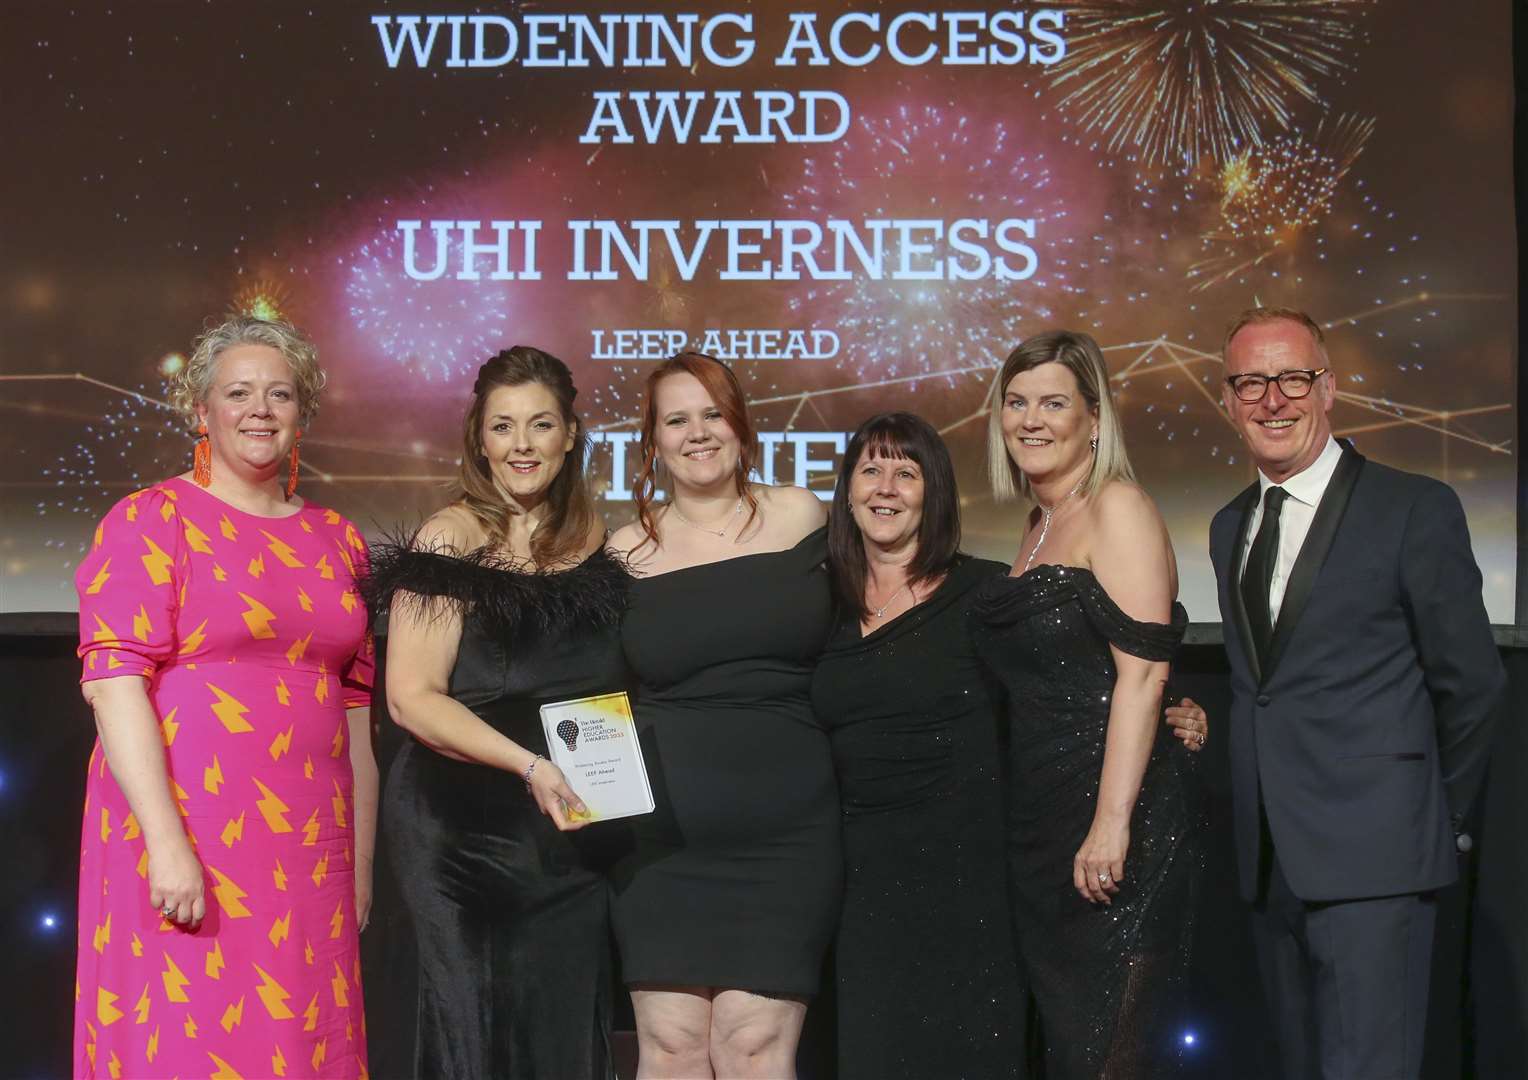 The LEEP Ahead team - Louise Martin-Theyers, Tabitha Rattray, Nina Gatt and Amanda Campbell - at the awards ceremony. Credit: Newsquest Scotland Events